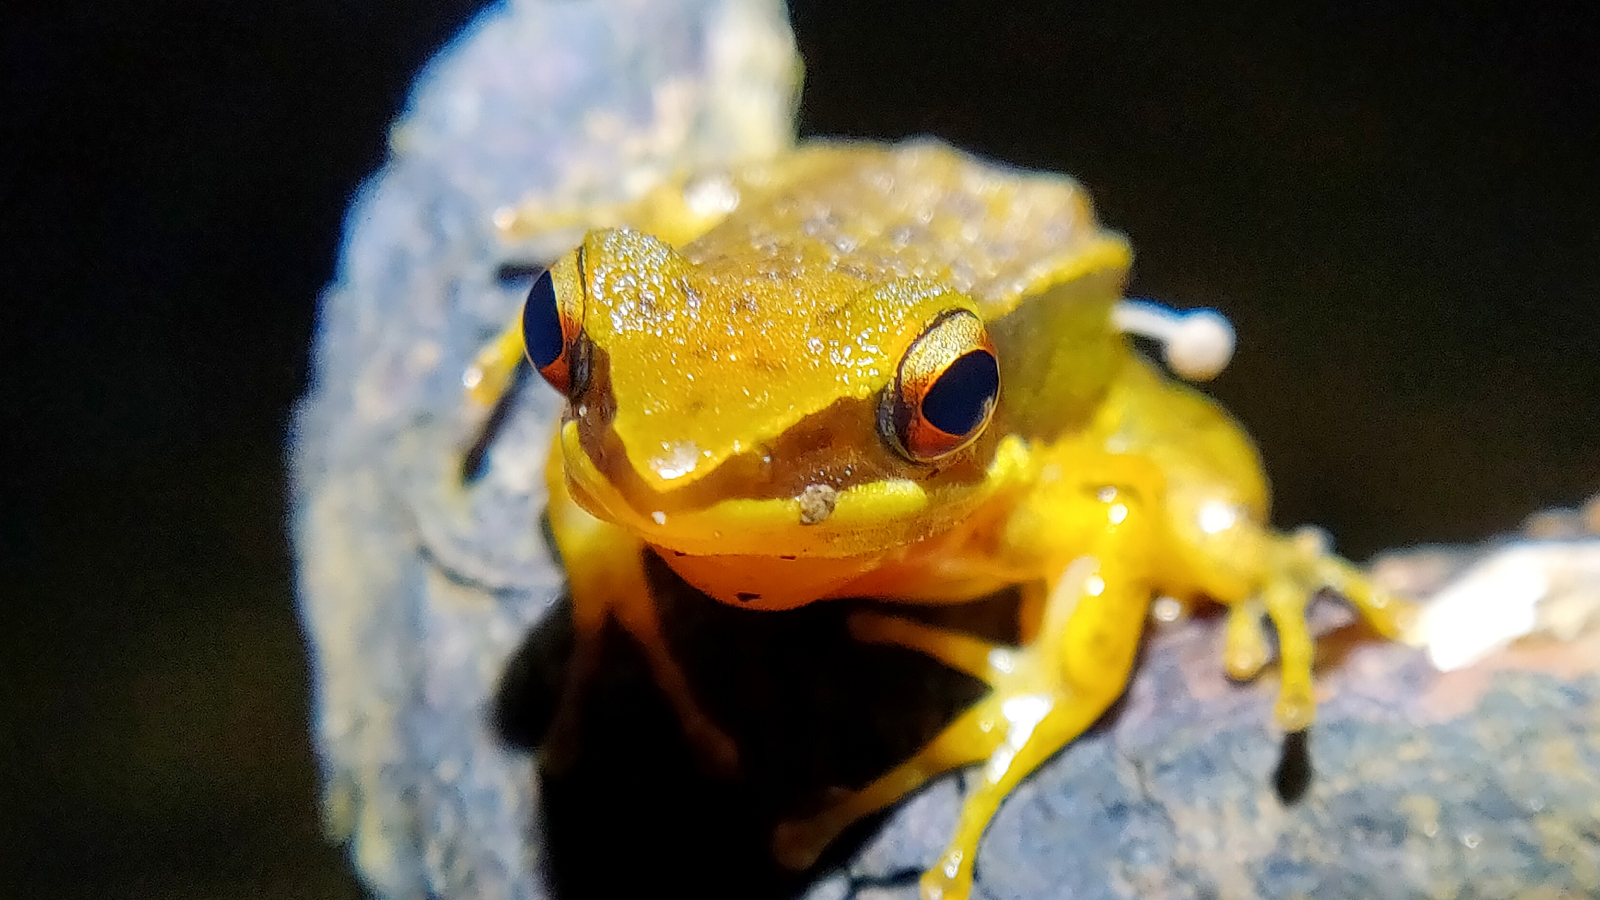 Profile photograph of the frog with the white mushroom visible on its right side.